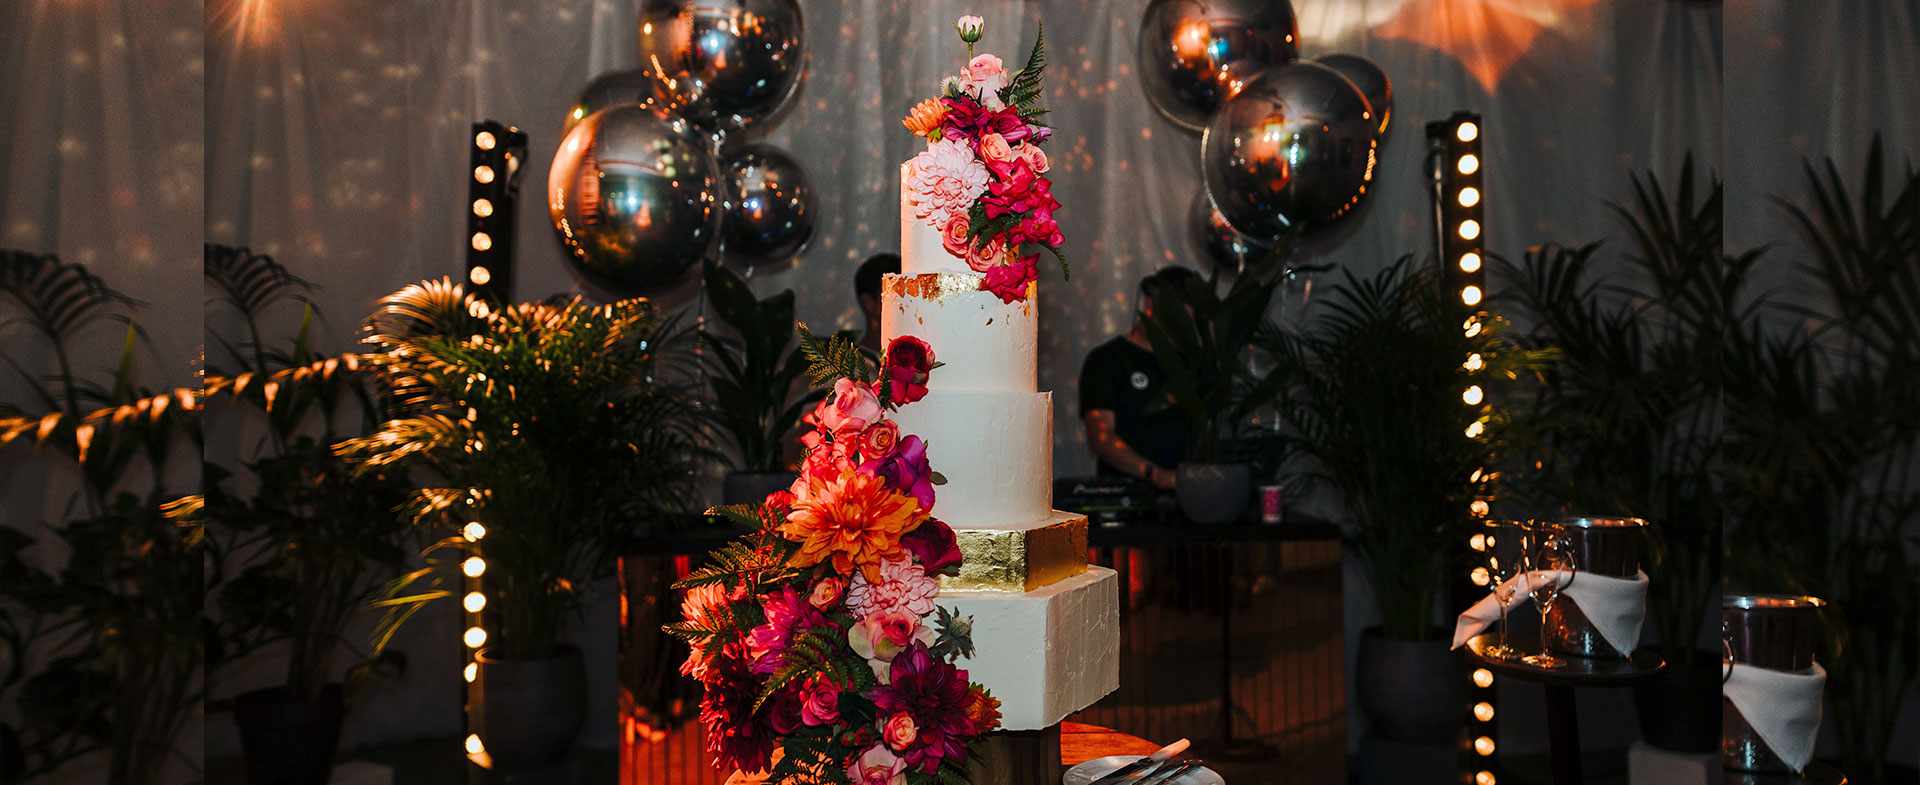 Hexagon Wedding Cake with a Gold Tier & Bright Flowers Full